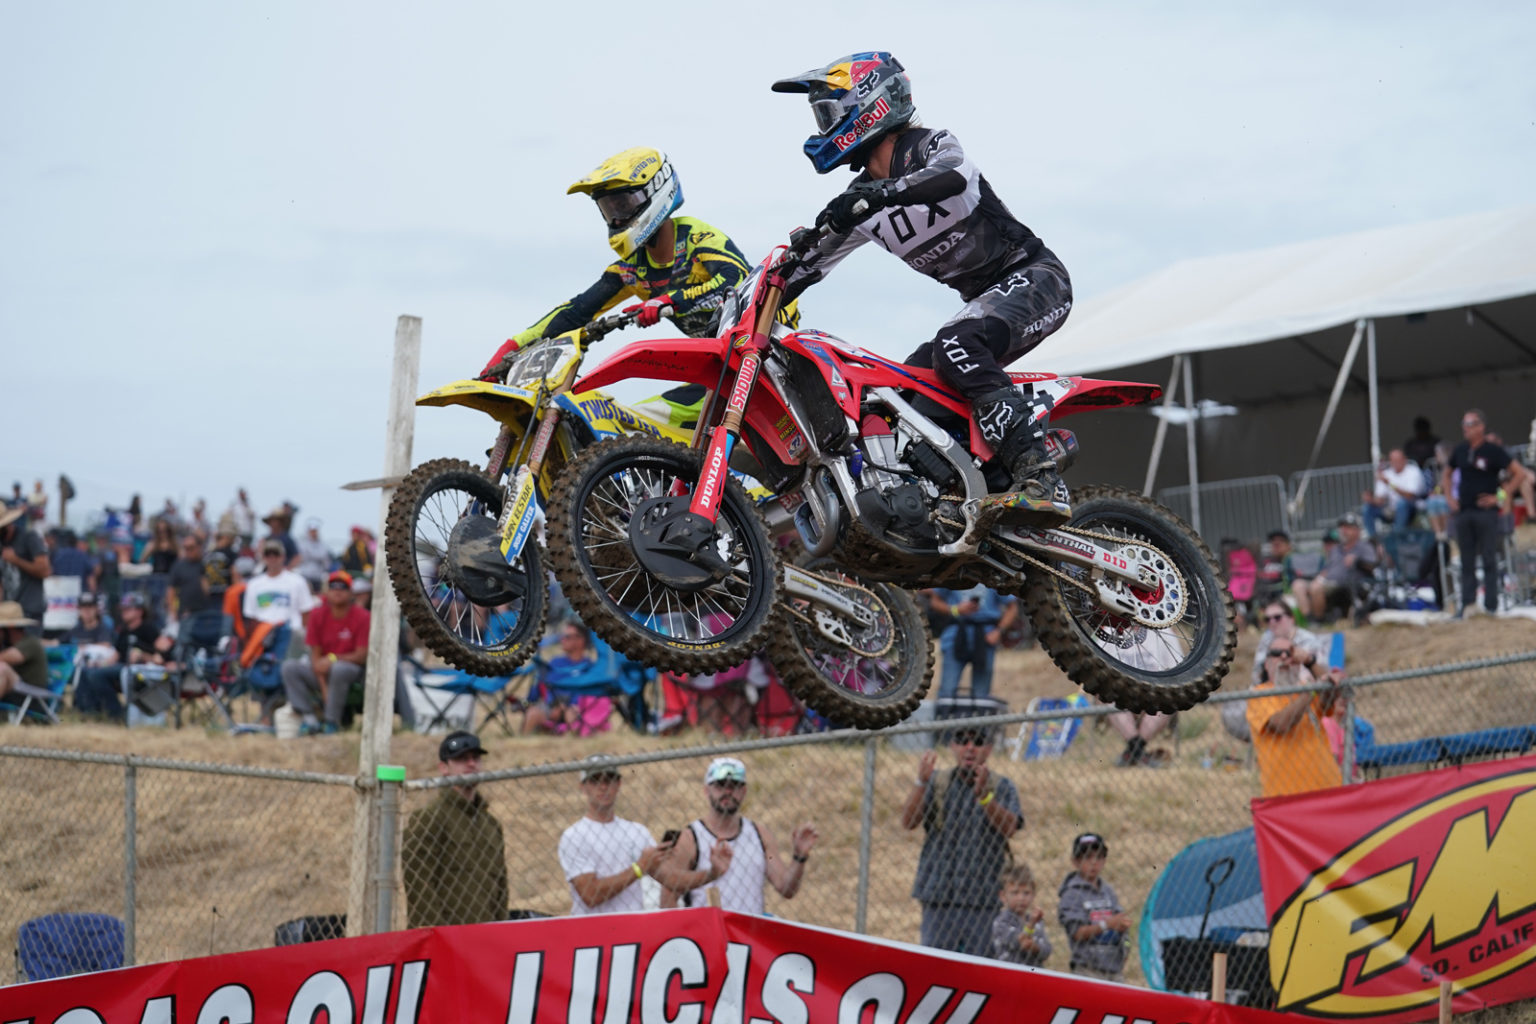 2022 Hangtown Motocross Qualifying Report & Results Swapmoto Live